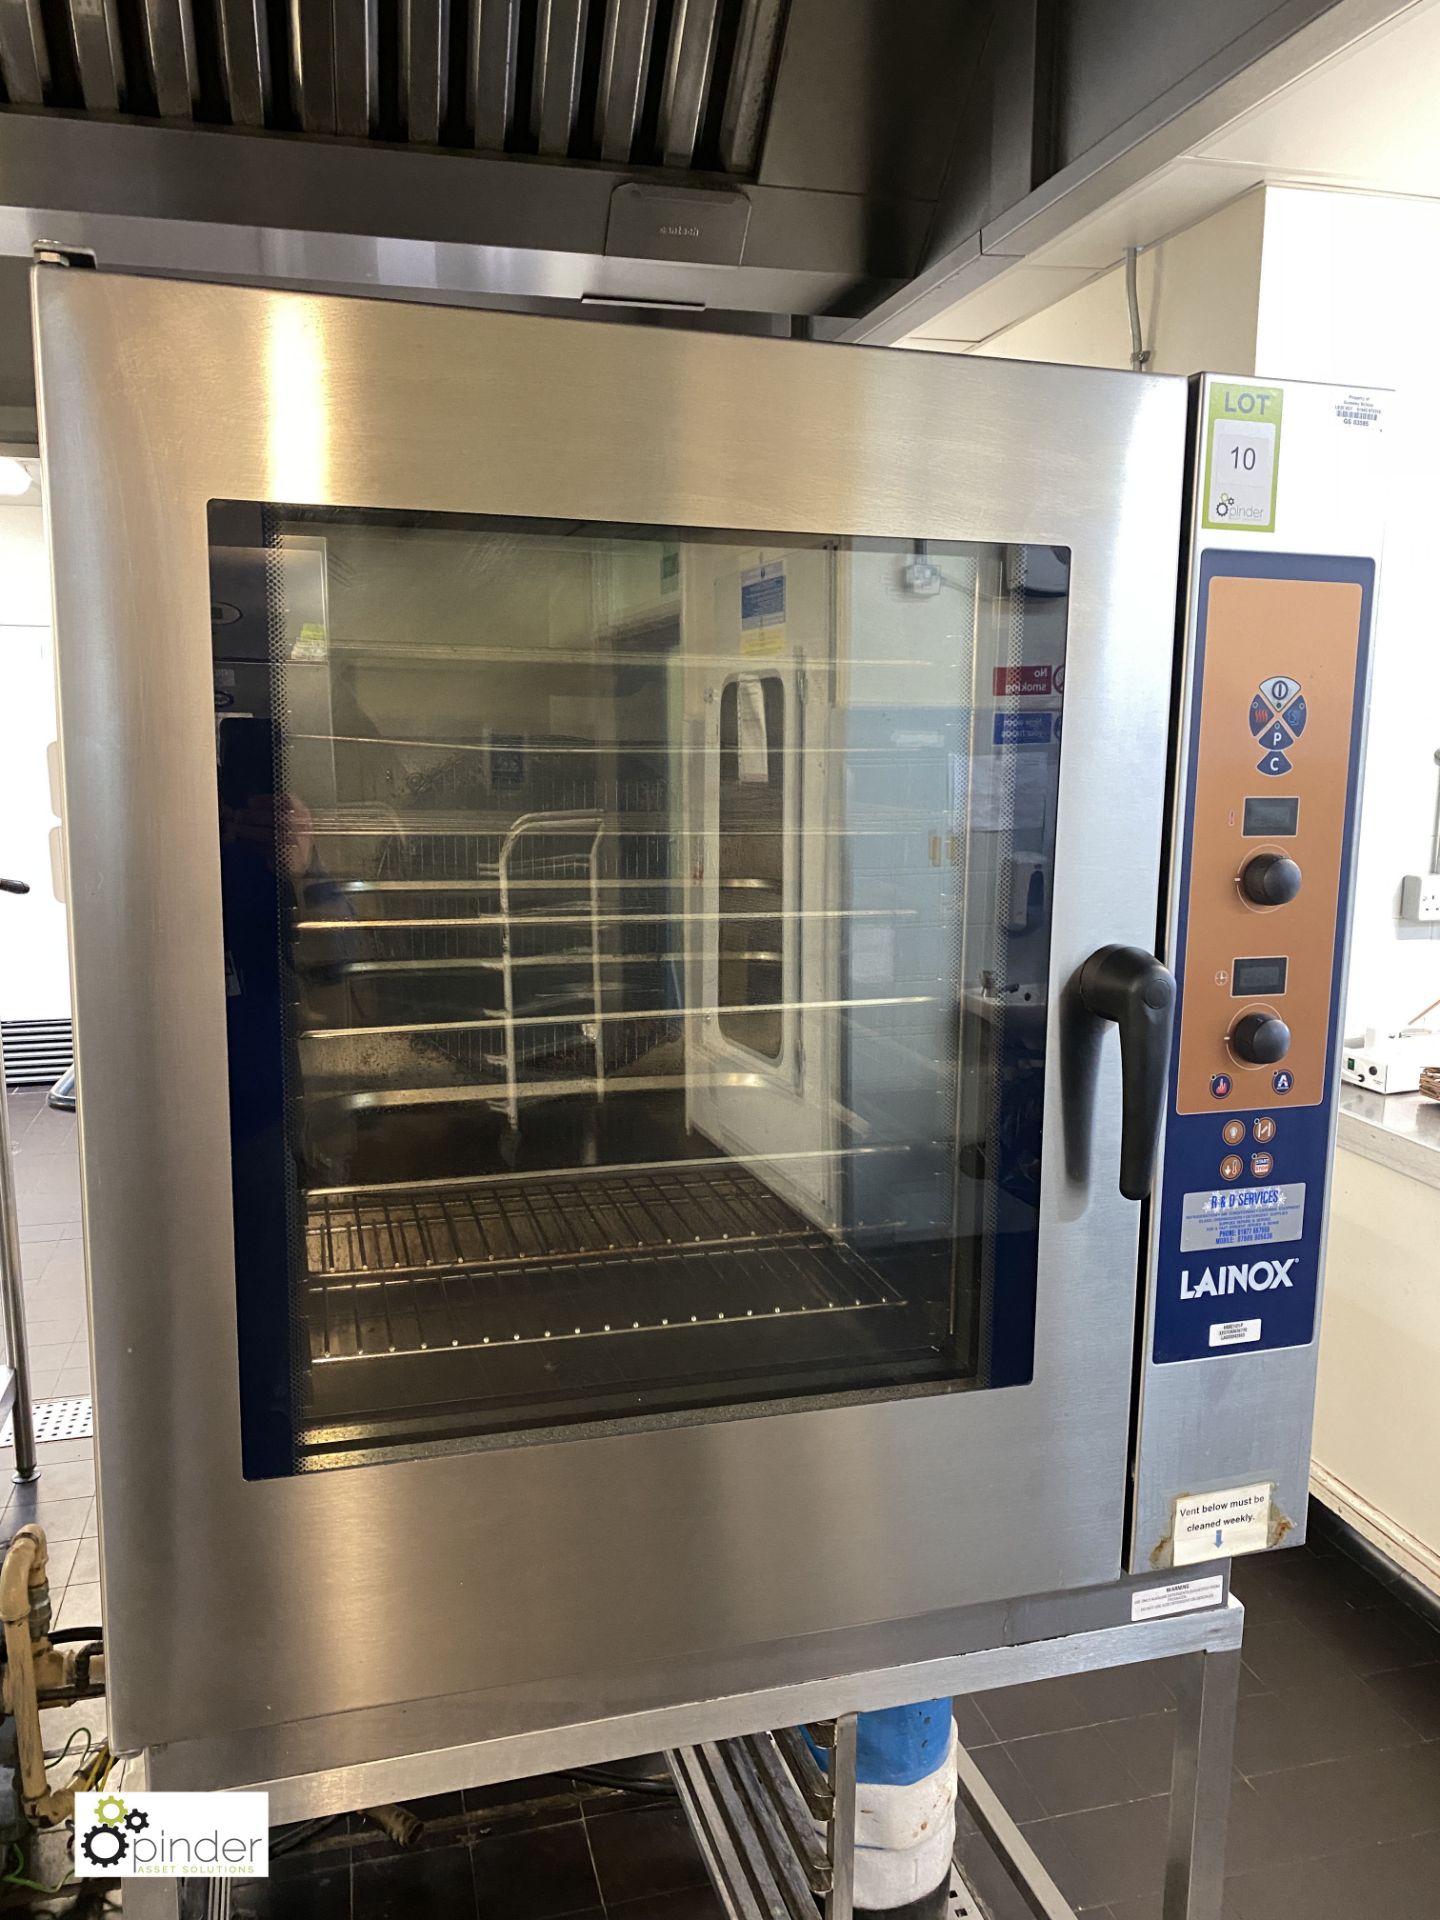 Lainox HME101P Combi Oven, 1000mm wide x 860mm deep x 1100mm high, 400volts, with stainless steel - Image 2 of 8